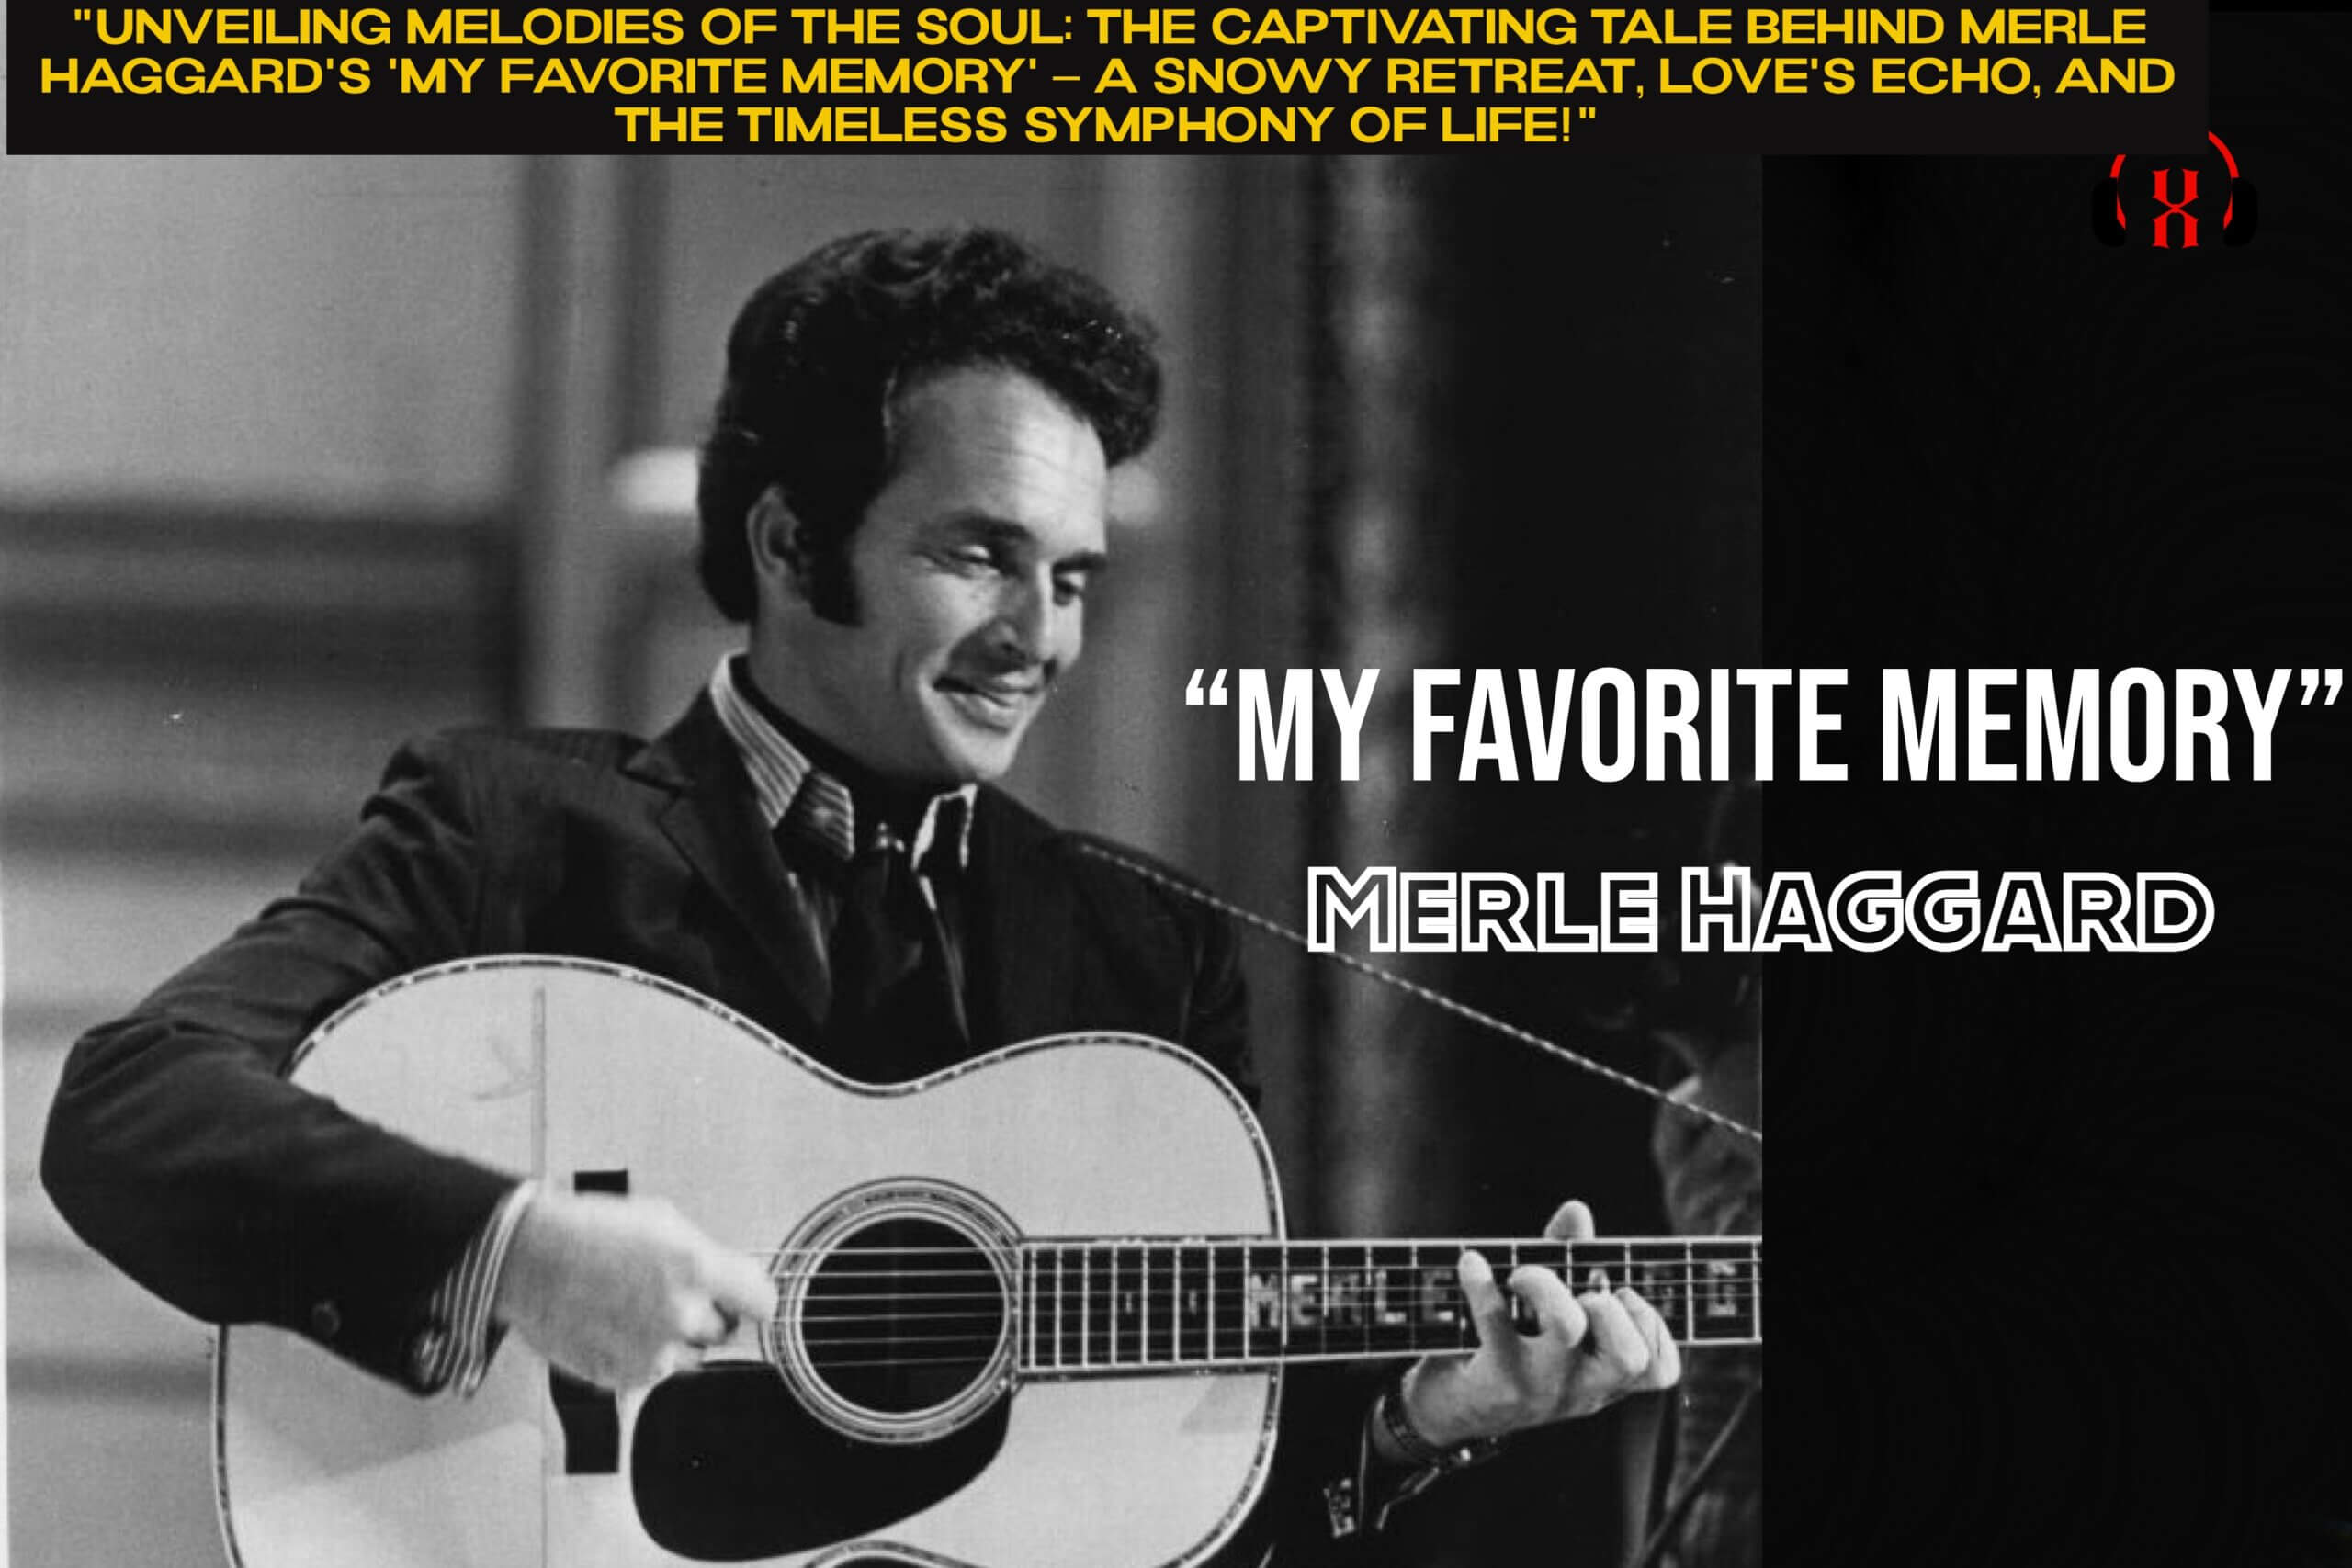 “Unveiling Melodies of the Soul: The Captivating Tale Behind Merle Haggard’s ‘My Favorite Memory’ – A Snowy Retreat, Love’s Echo, and the Timeless Symphony of Life!”